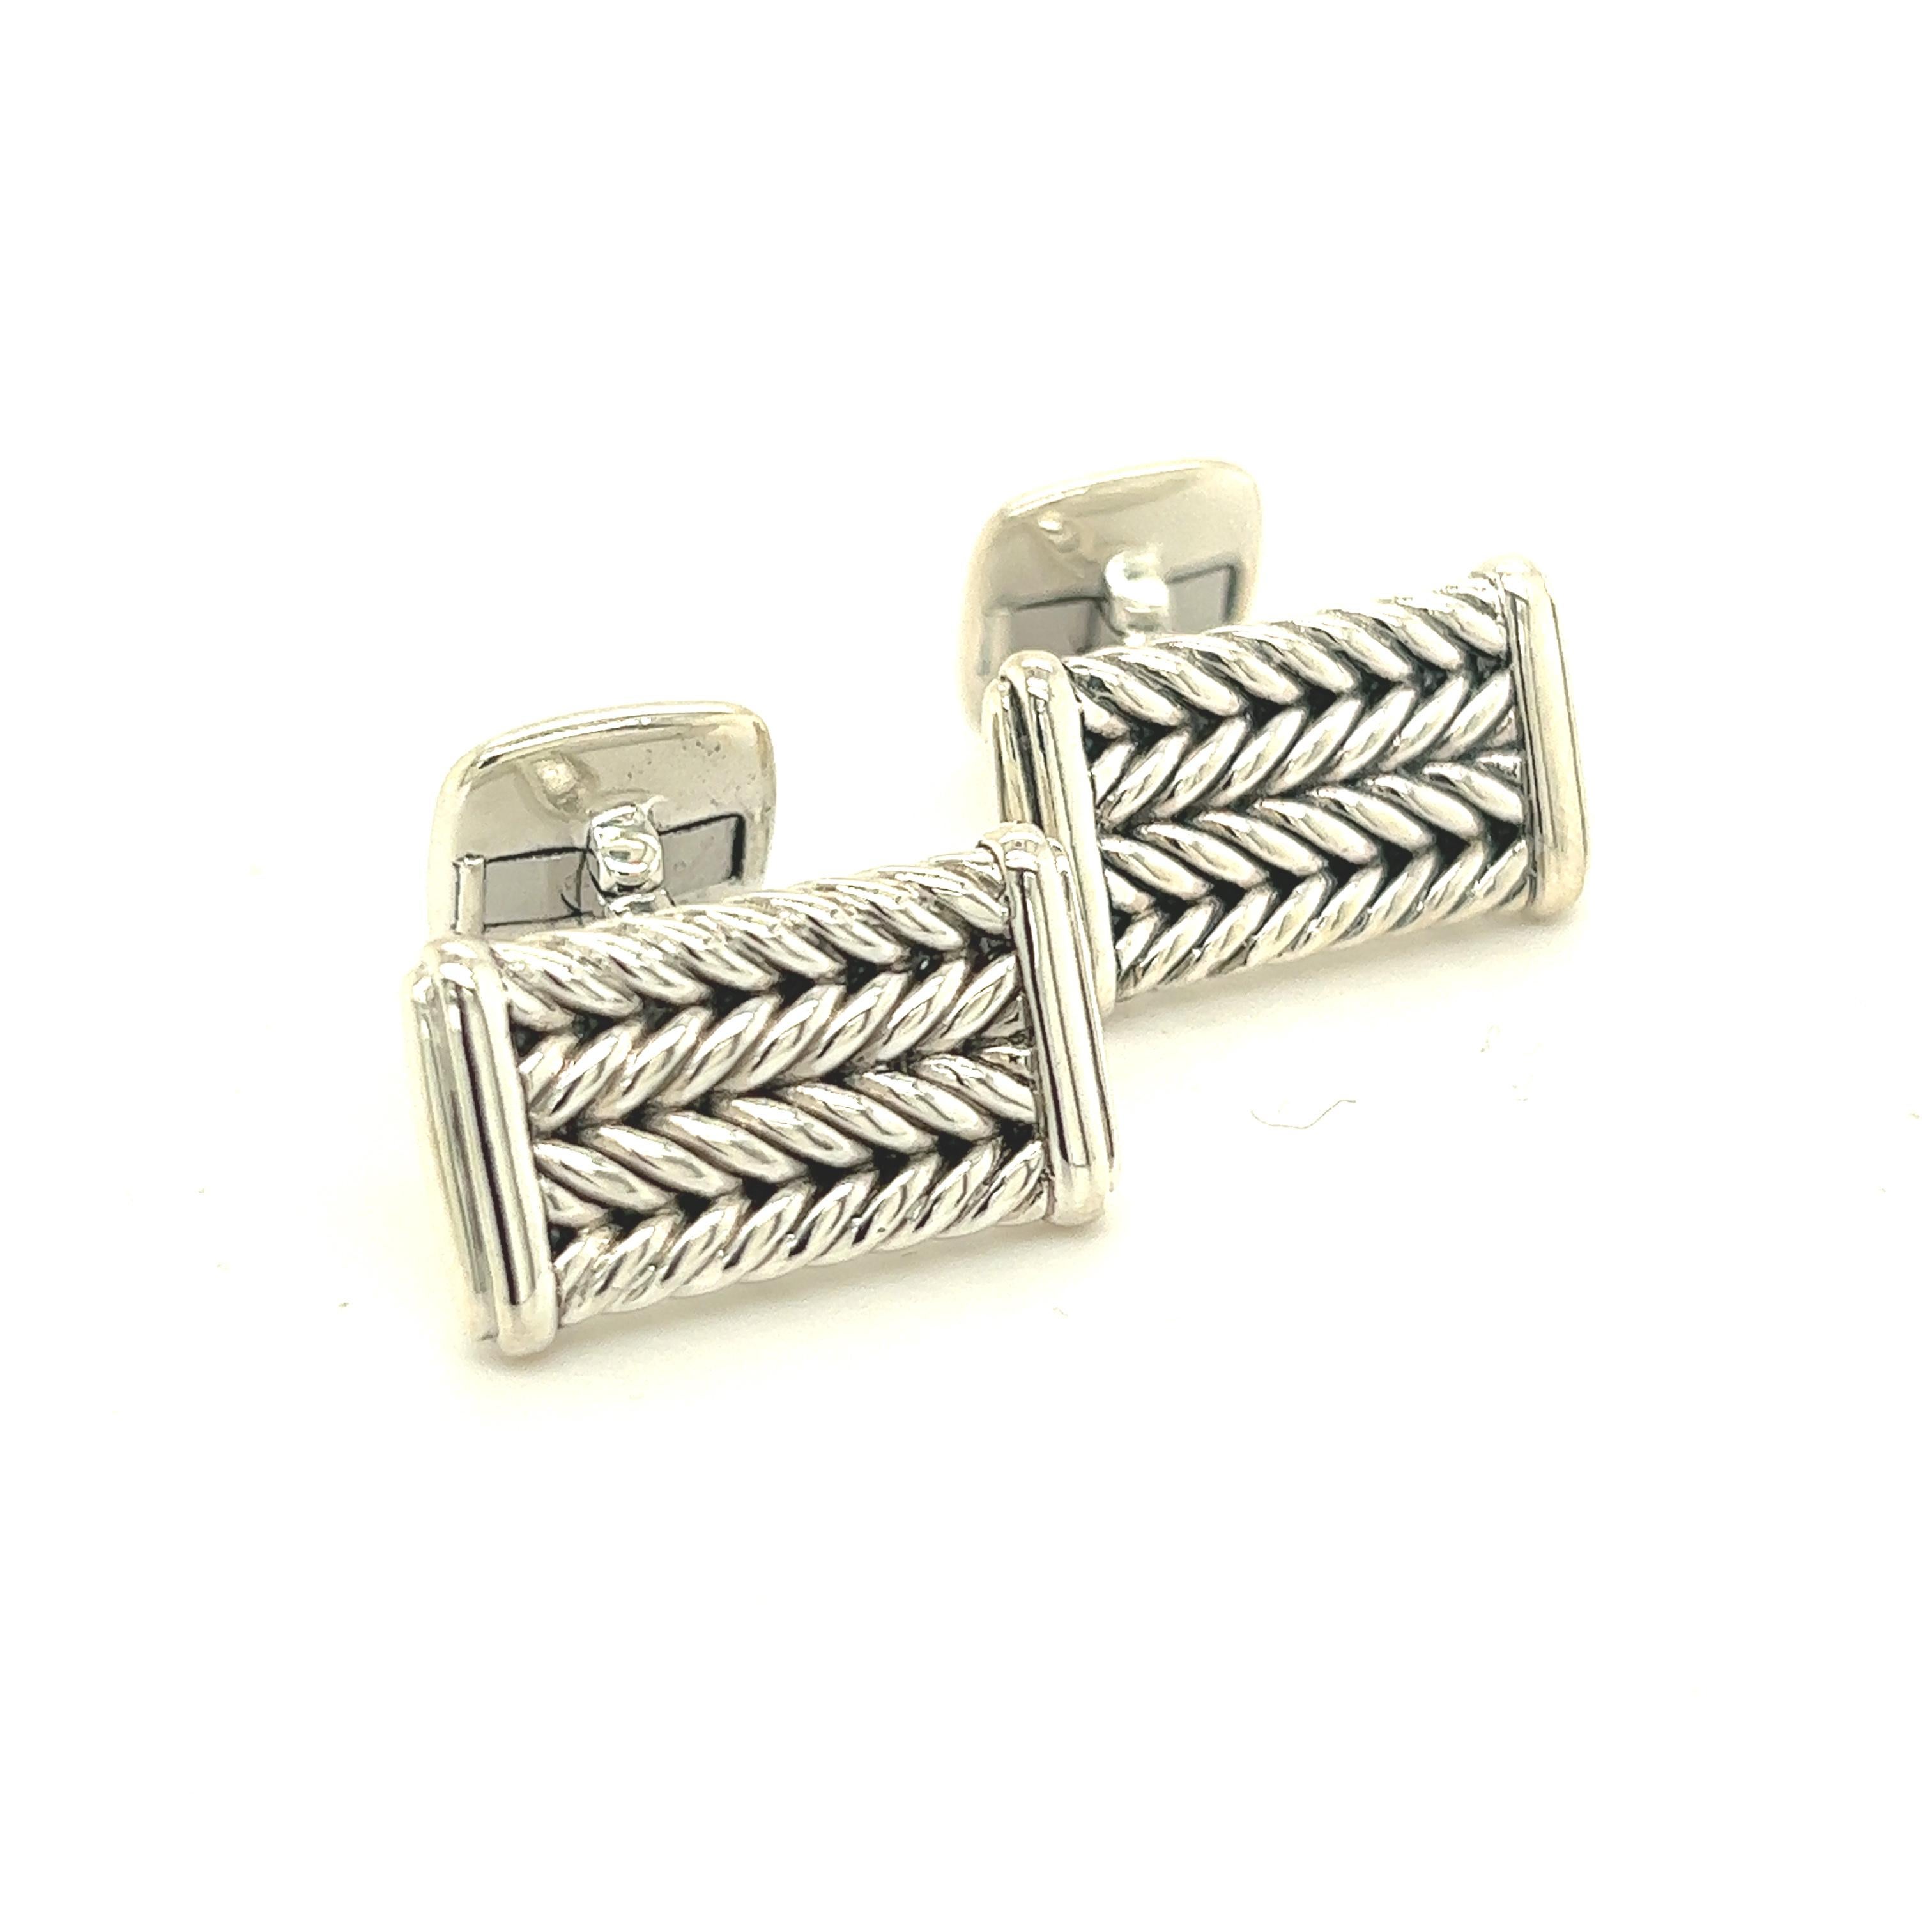 David Yurman Estate Mens Cufflinks Sterling Silver DY132

Retail: $799.00

TRUSTED SELLER SINCE 2002

PLEASE SEE OUR HUNDREDS OF POSITIVE FEEDBACKS FROM OUR CLIENTS!!

FREE SHIPPING

Details
Grams: 20
Metal: Sterling Silver

These Authentic David